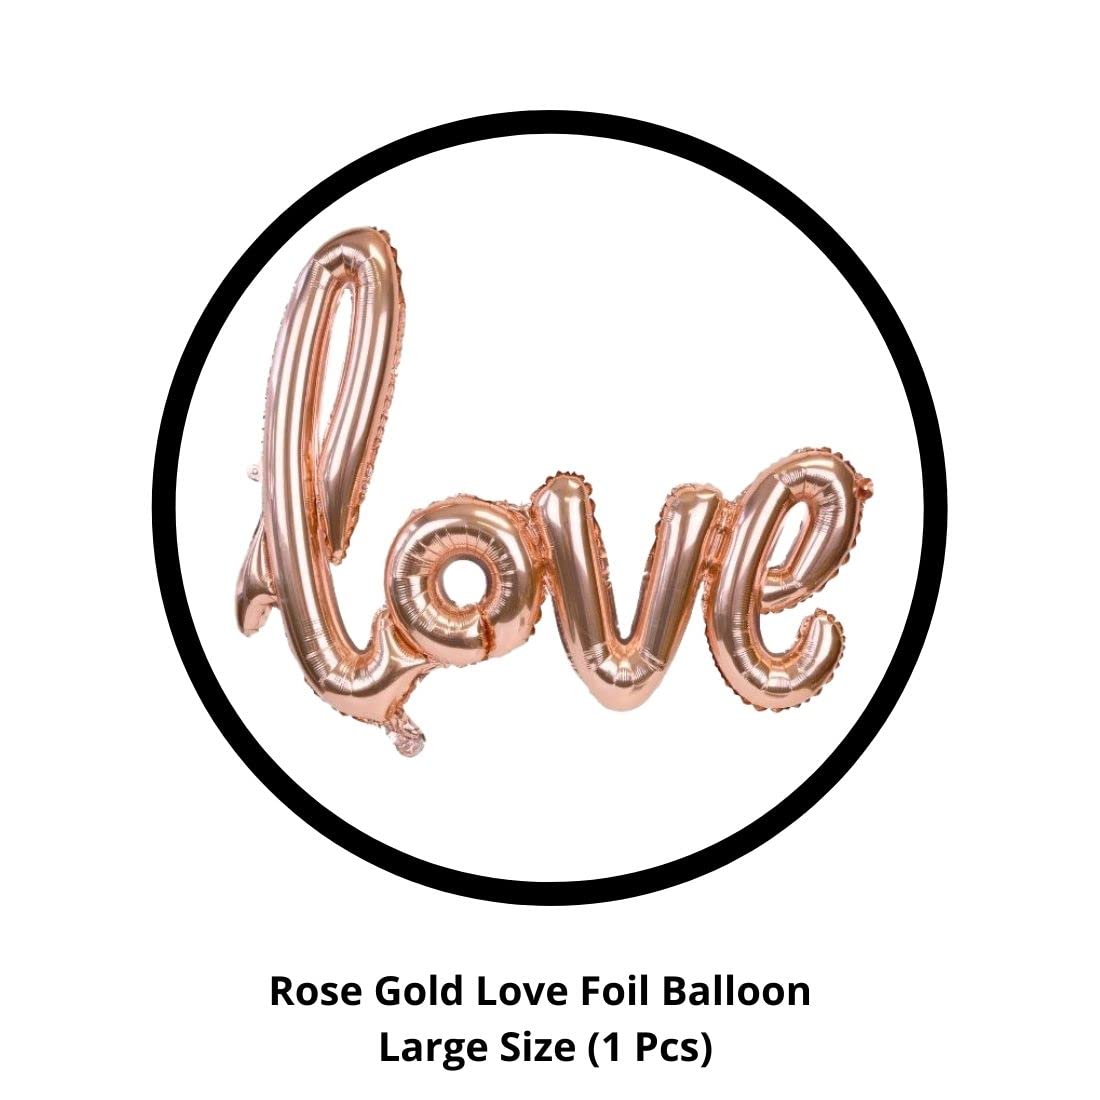 Love Shape Letter Foil Balloon and Rose Gold Metallic Balloons for Birthday Wedding Valentine’s Day Engagement Party Decorations (15 piece)